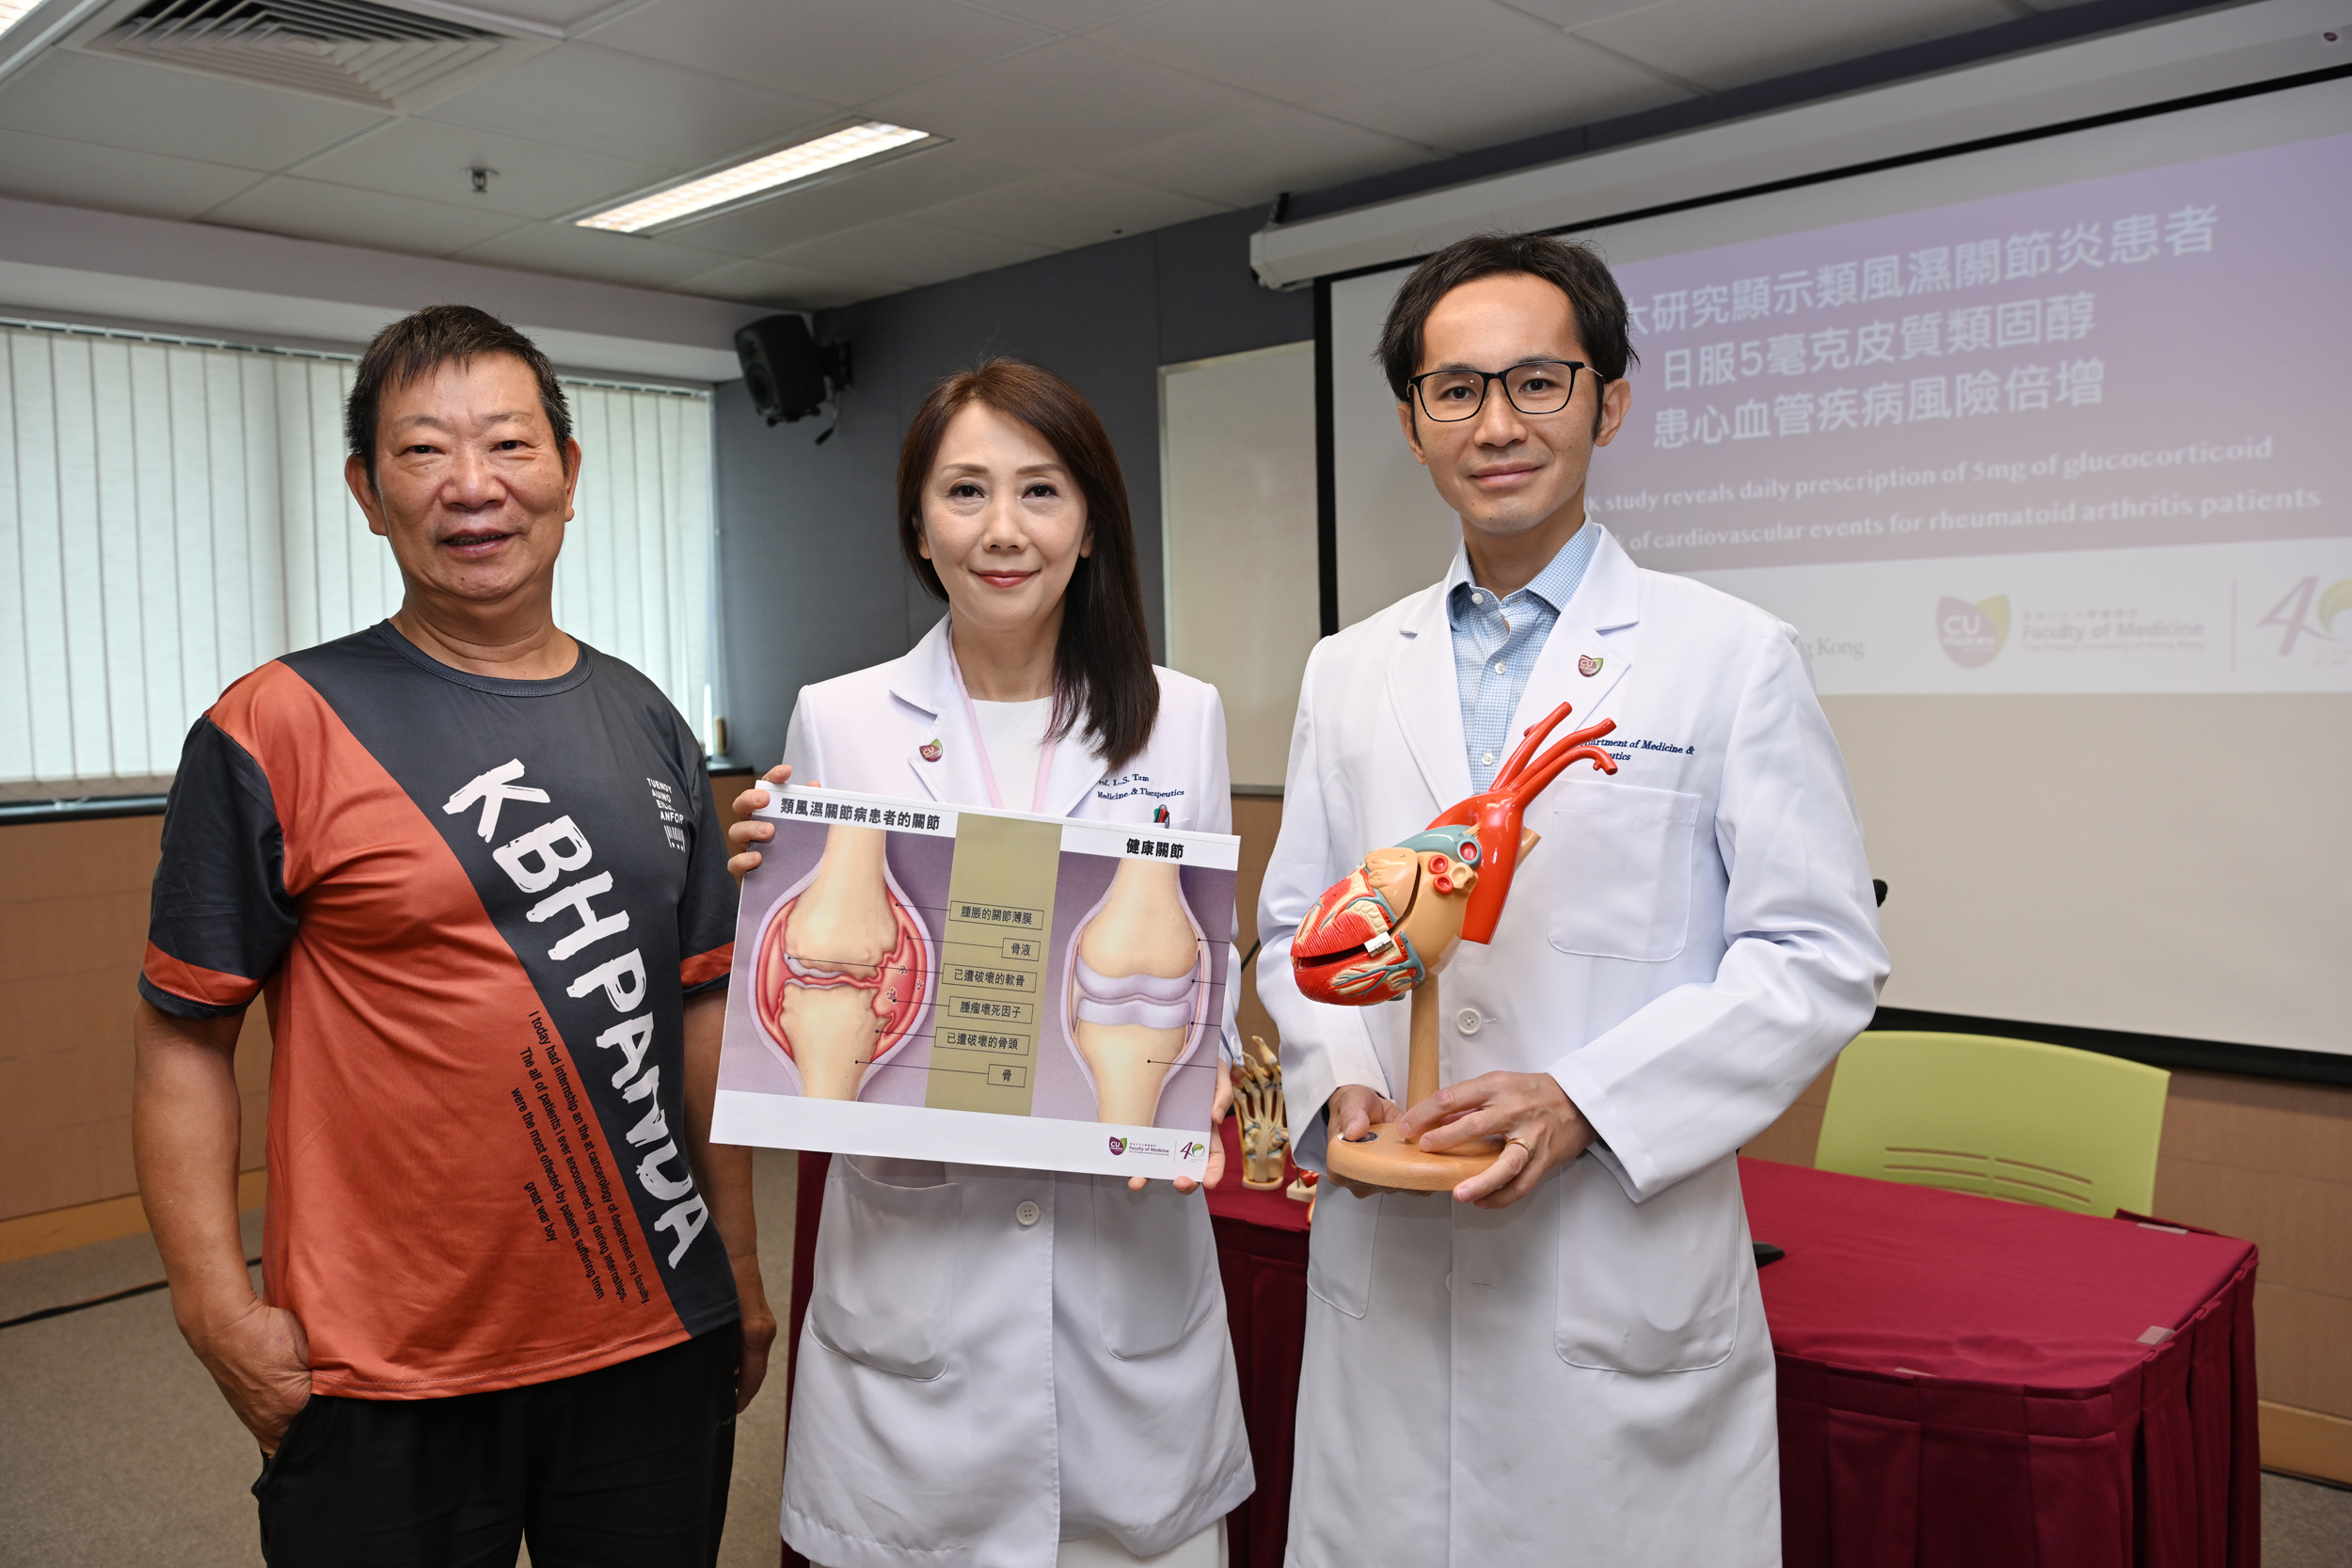 RA patient, Professor Tam and Dr So